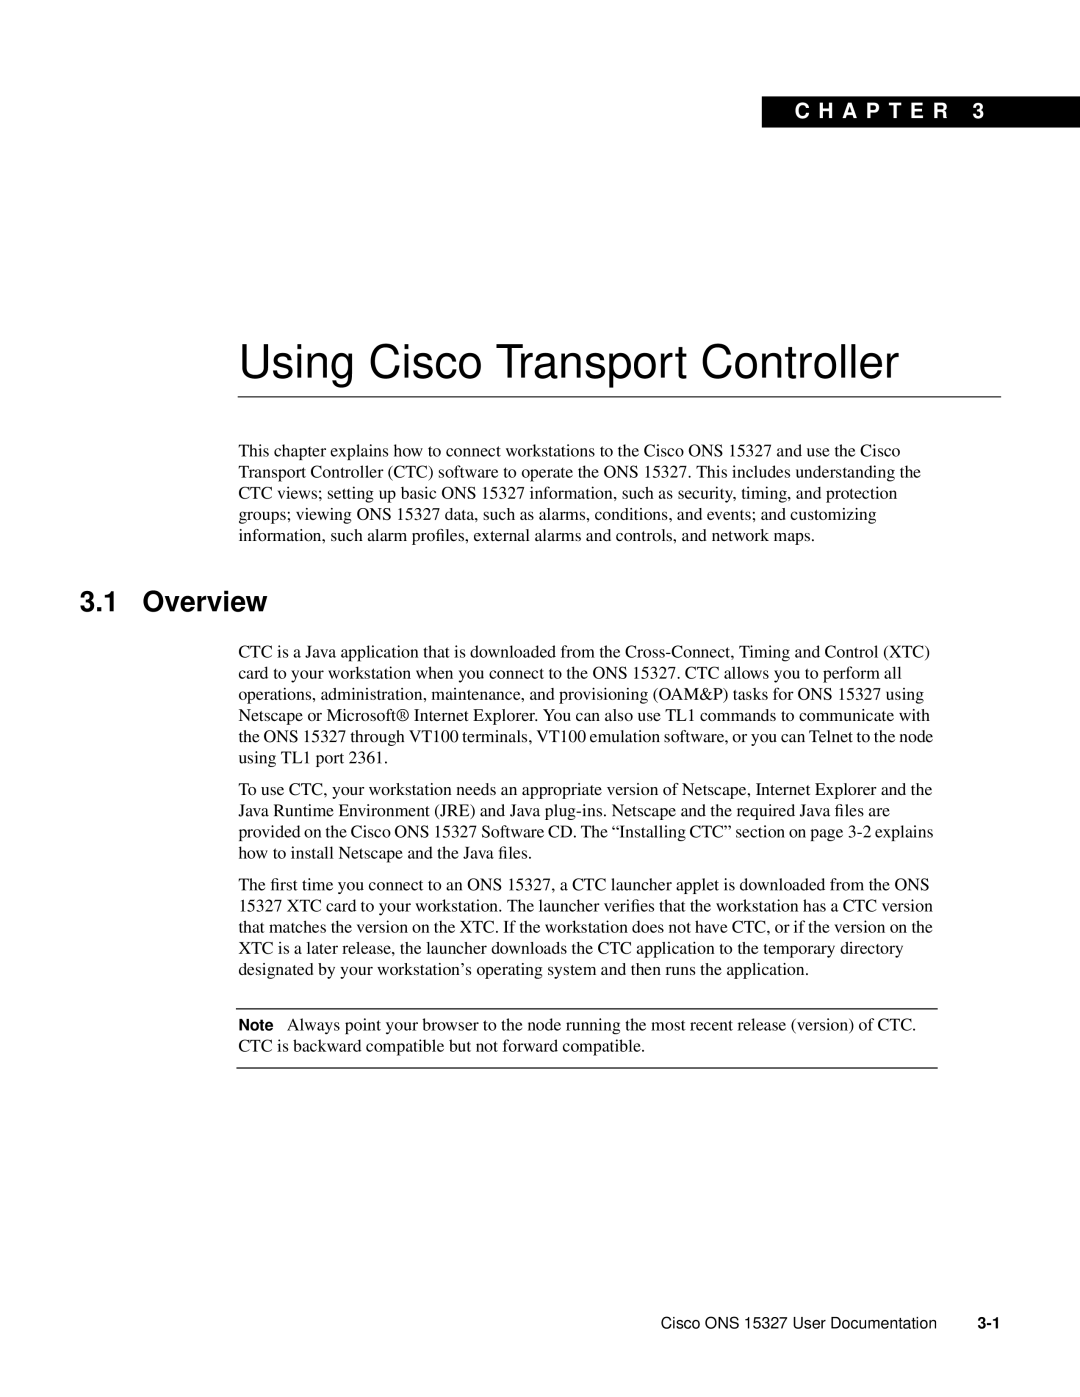 Cisco Systems ONS 15327 manual Overview, Using Cisco Transport Controller, C H A P T E R 